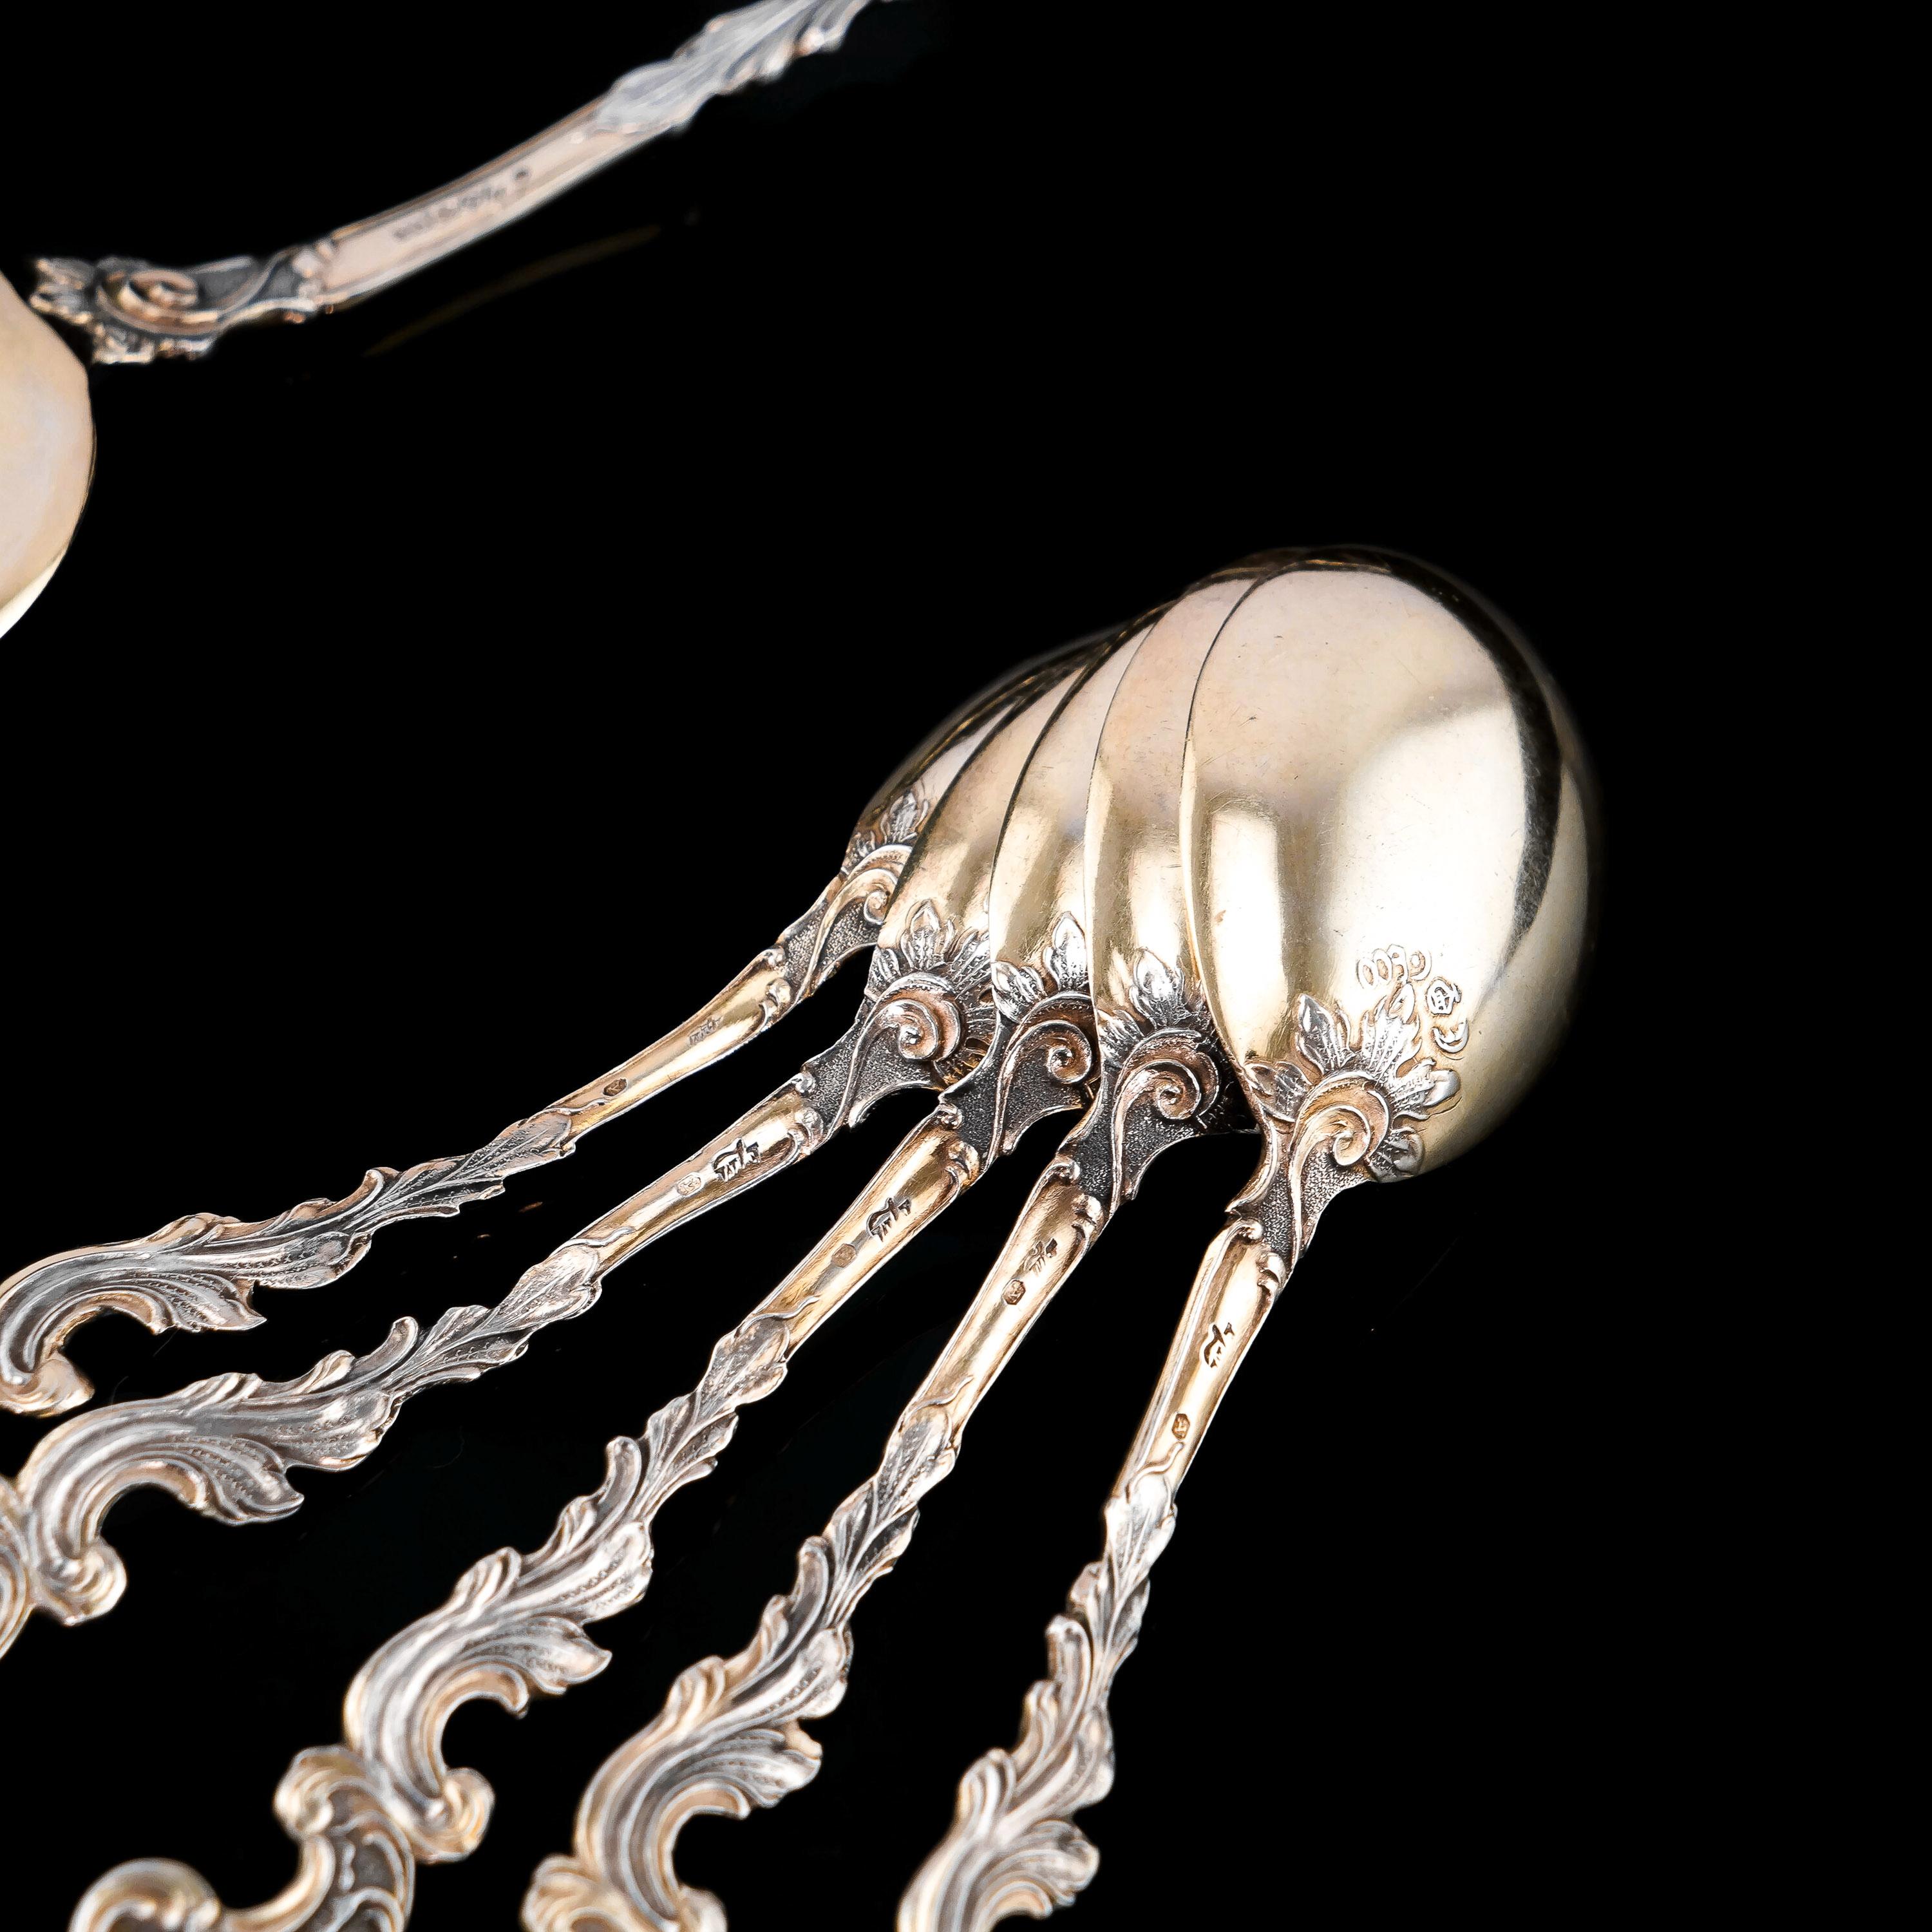 Antique German Solid Silver Icecream Server & Spoons in Rococo Style - c.1900 For Sale 8